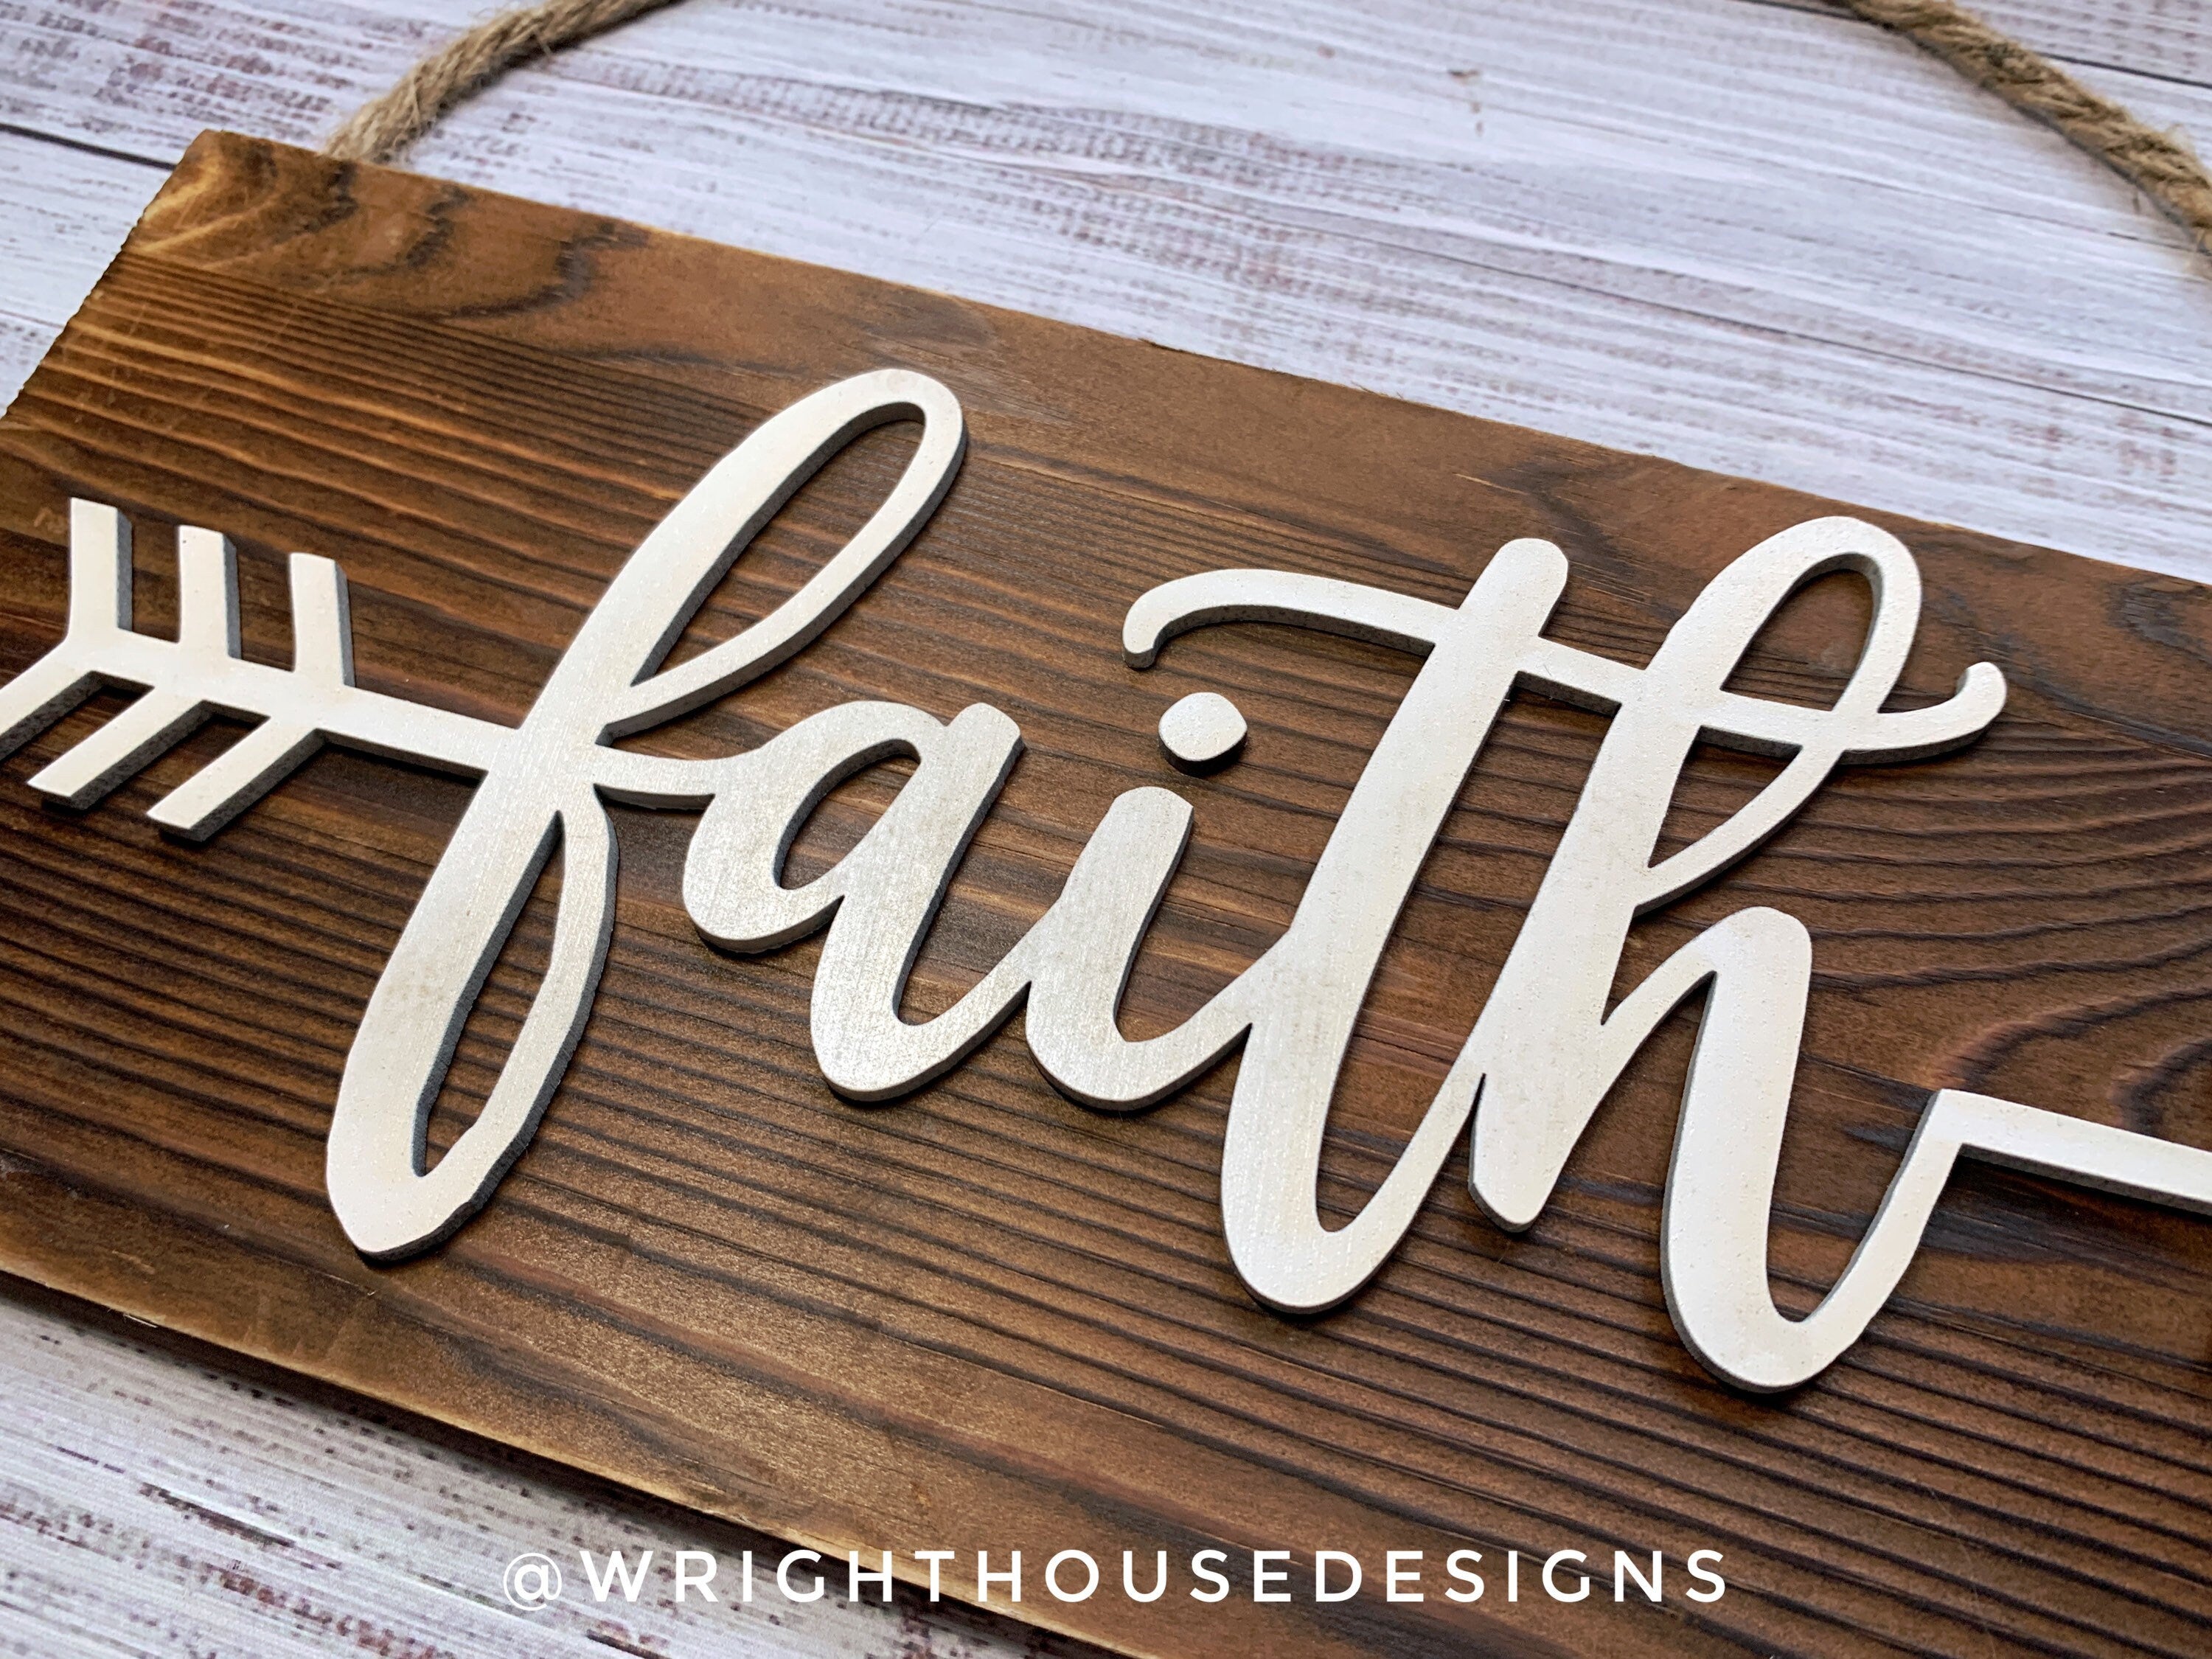 Faith Arrow Word Art - Rustic Farmhouse - Reclaimed Pallet Plank Board Sign - Wooden Wall Art - Bookshelf Decor and She Shed Signs